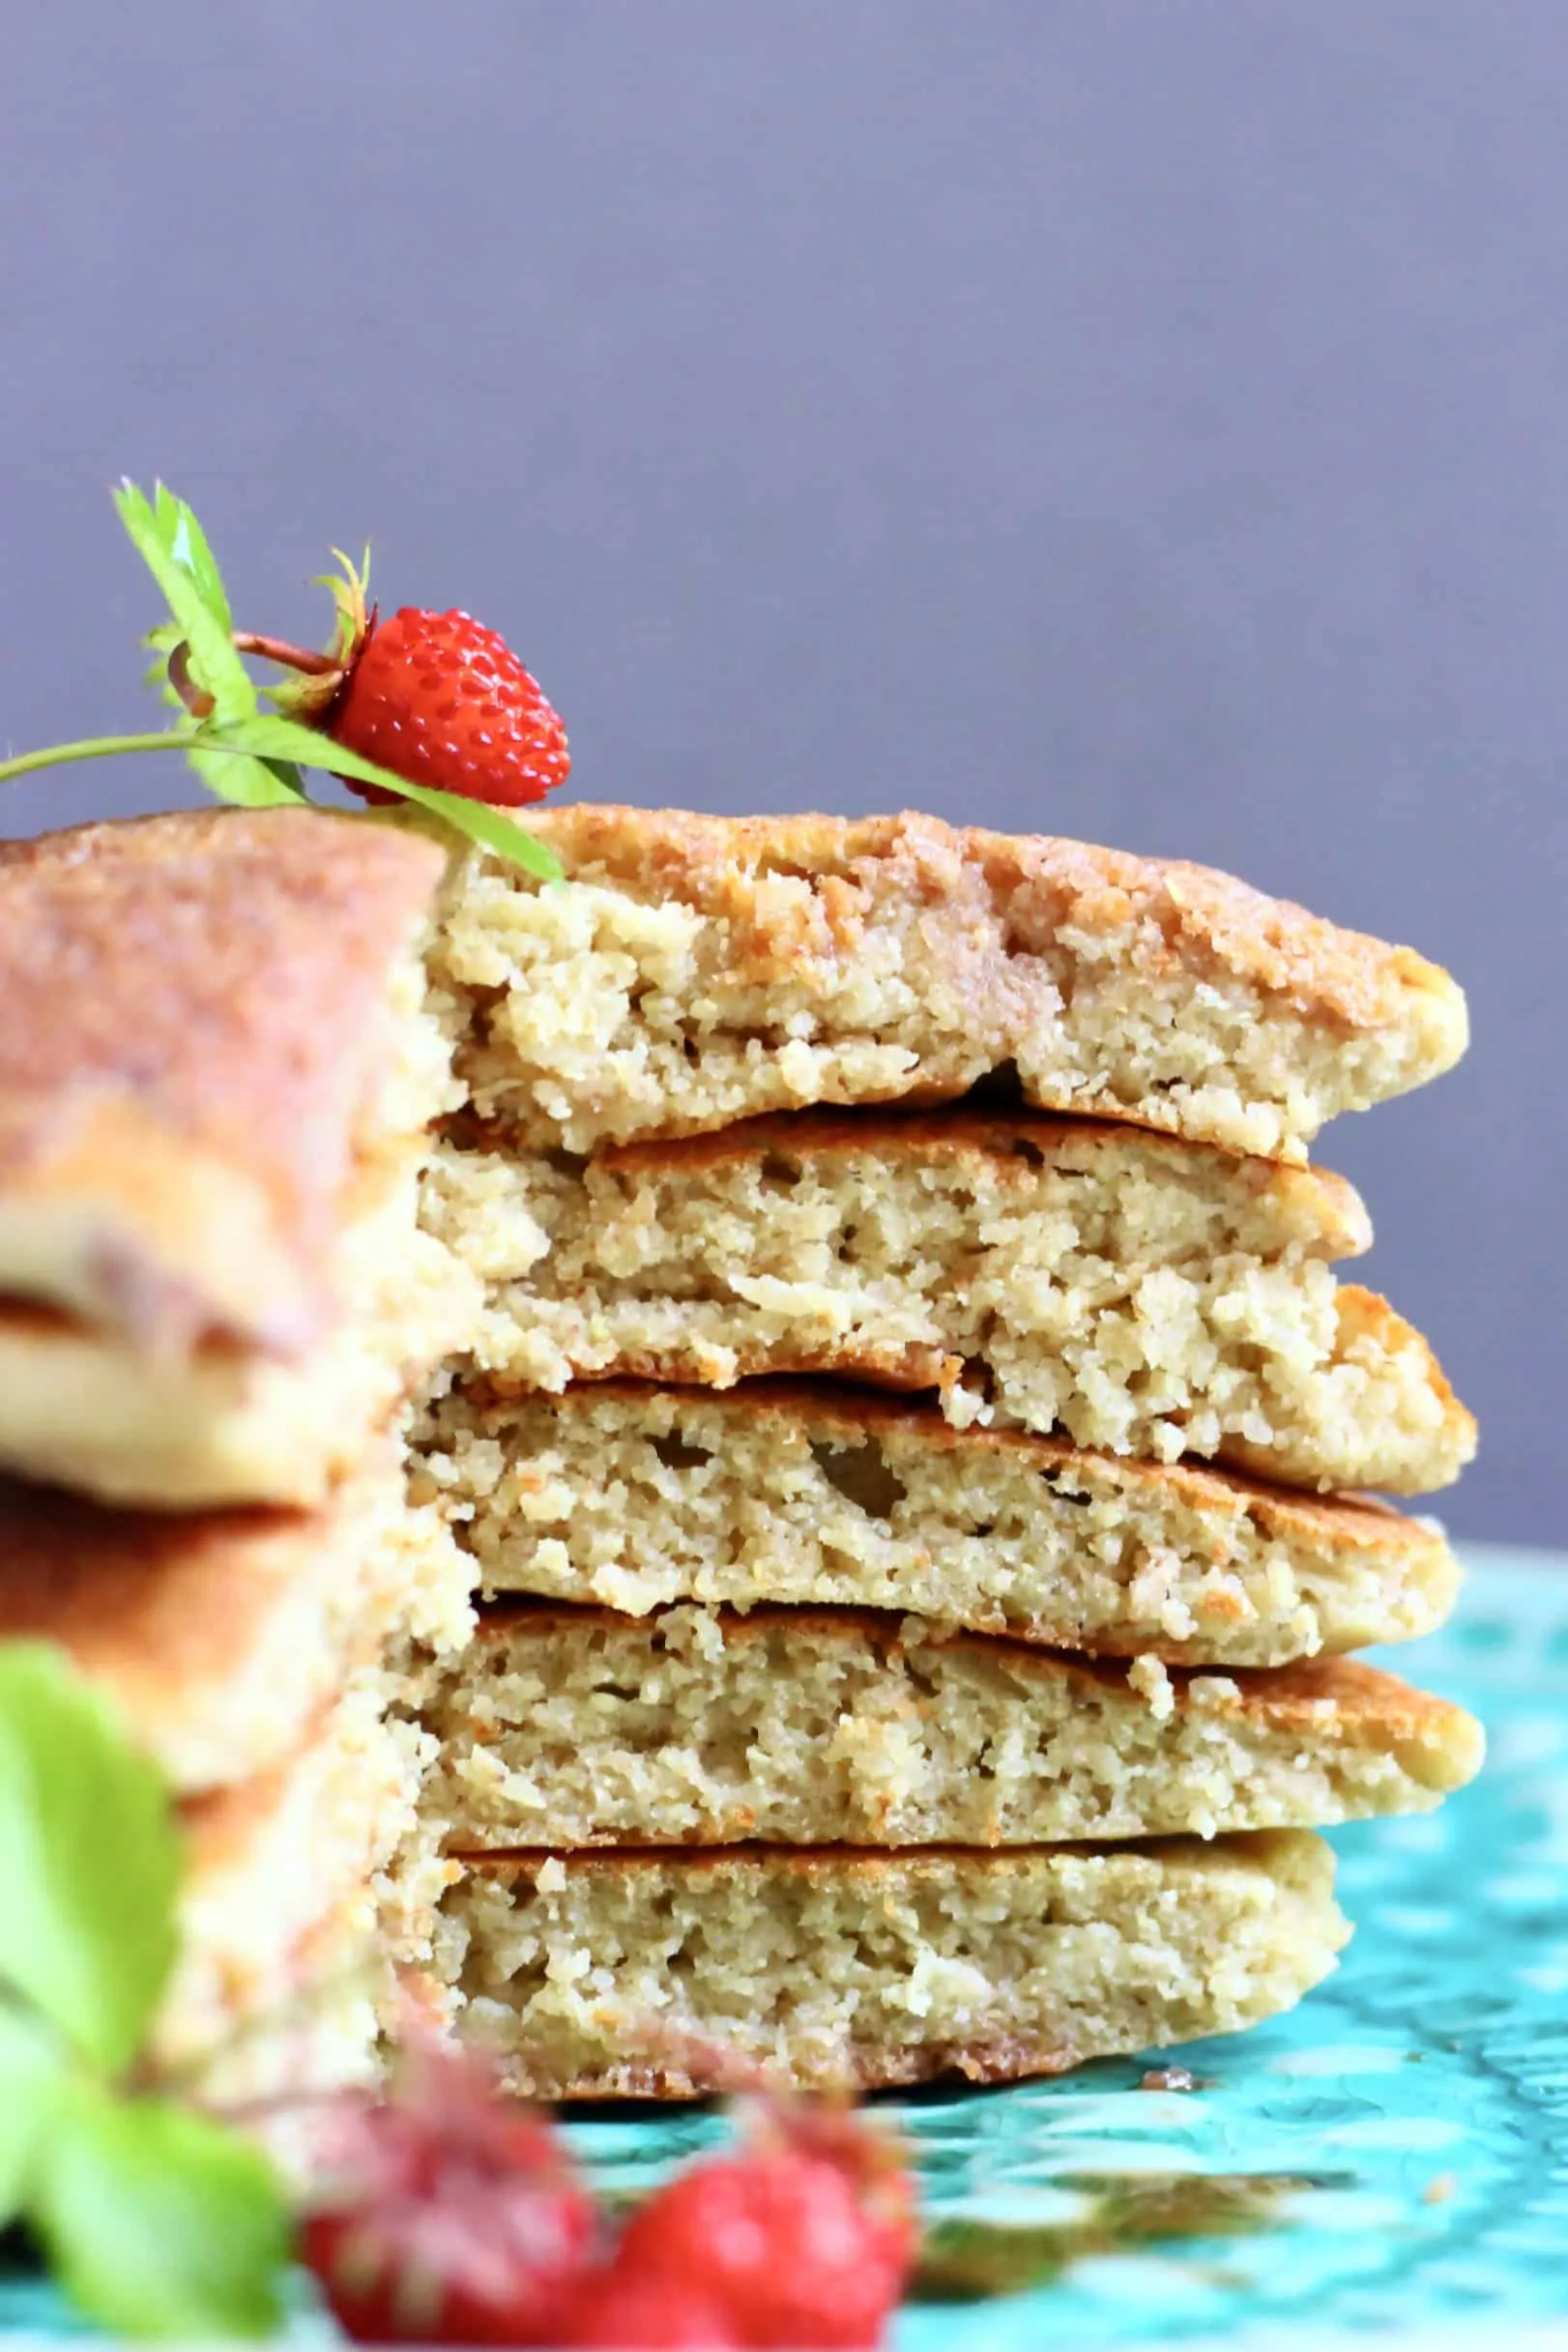 A sliced stack of five quinoa pancakes on a plate